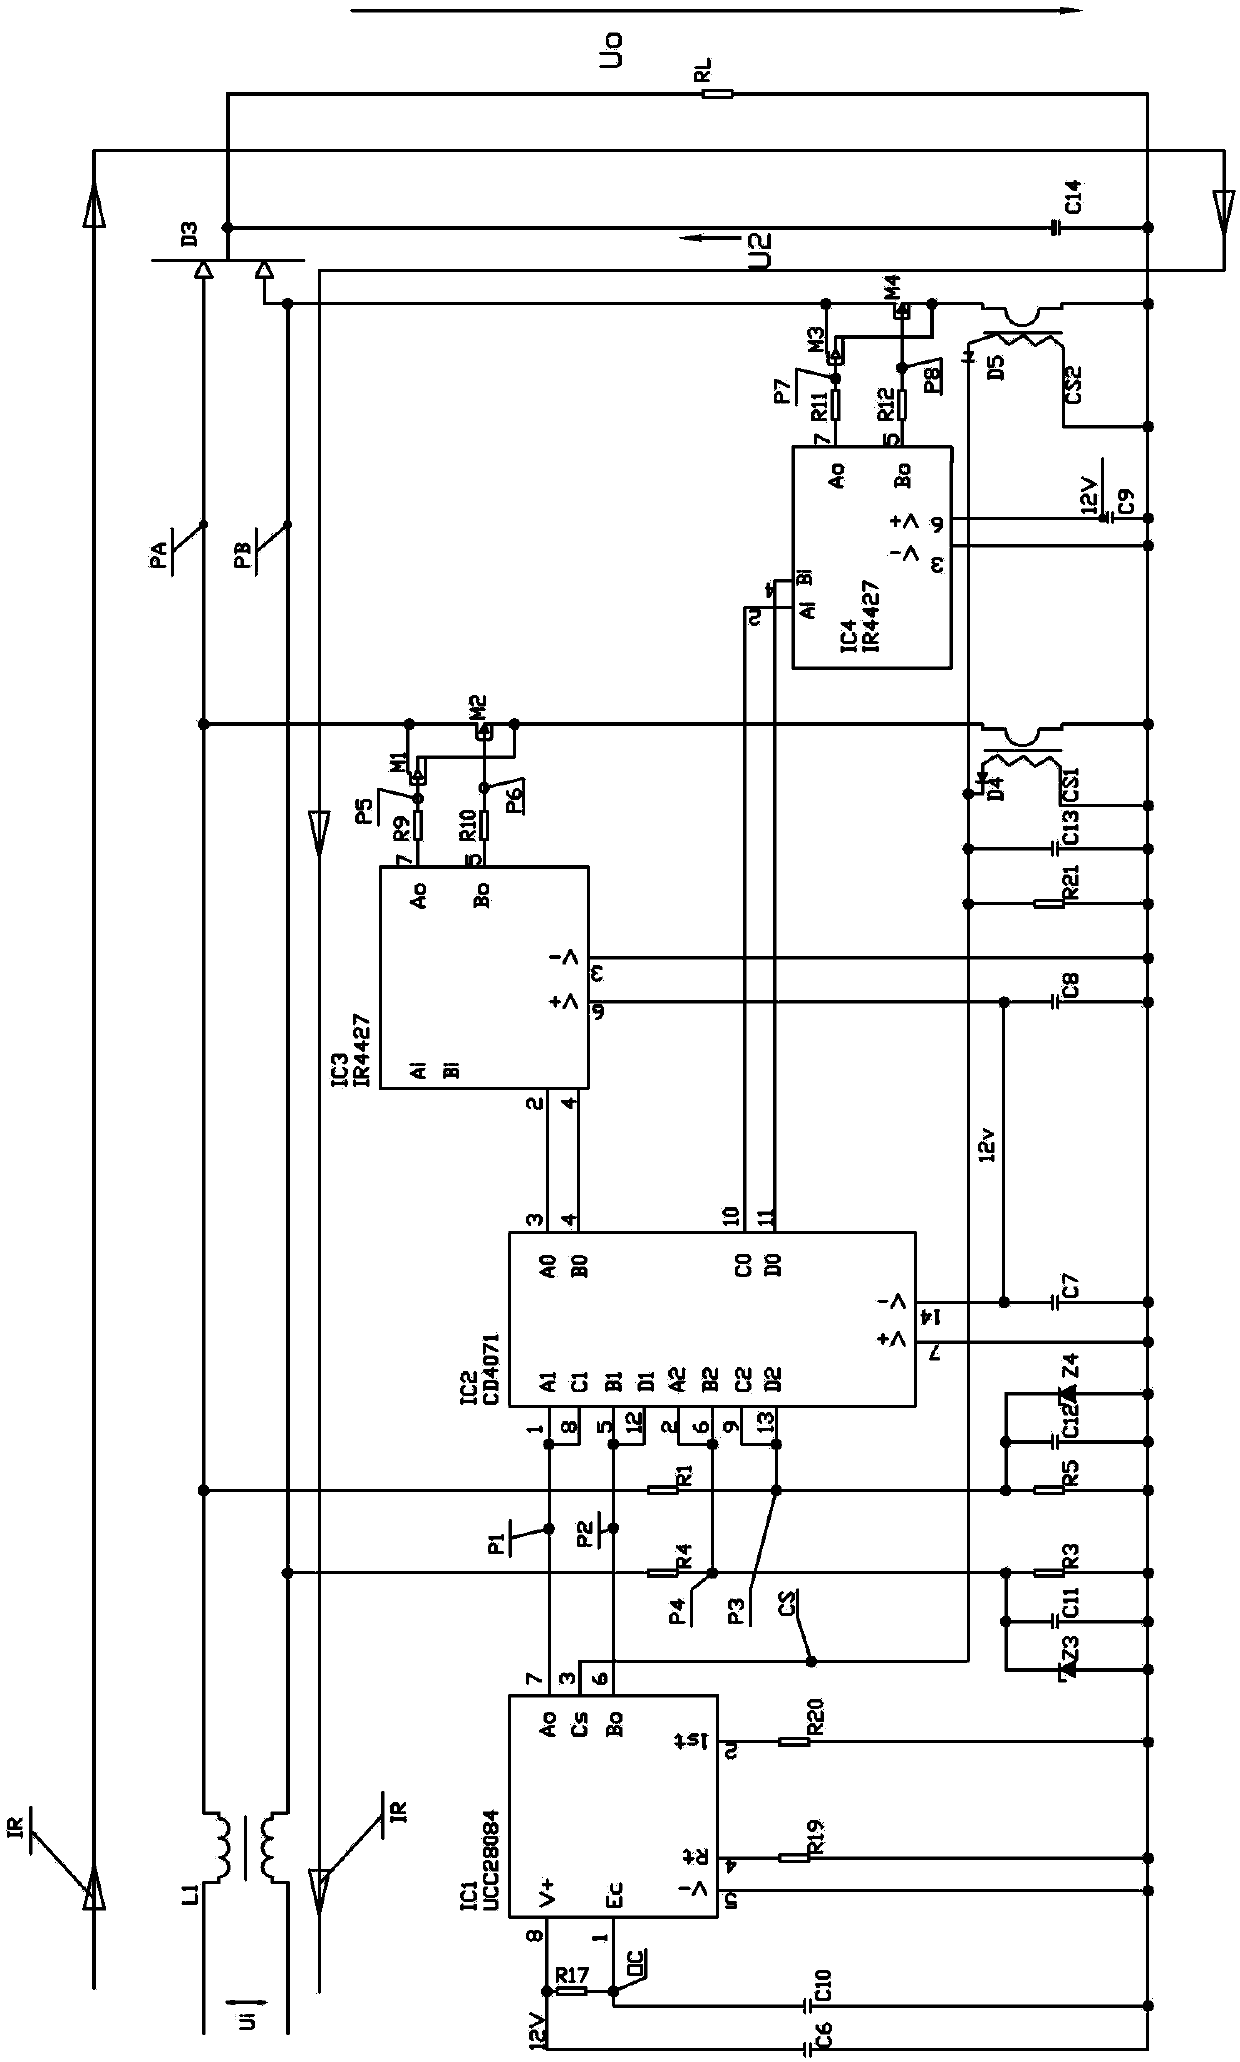 Automatically-directed power-switching circuit with output protection function